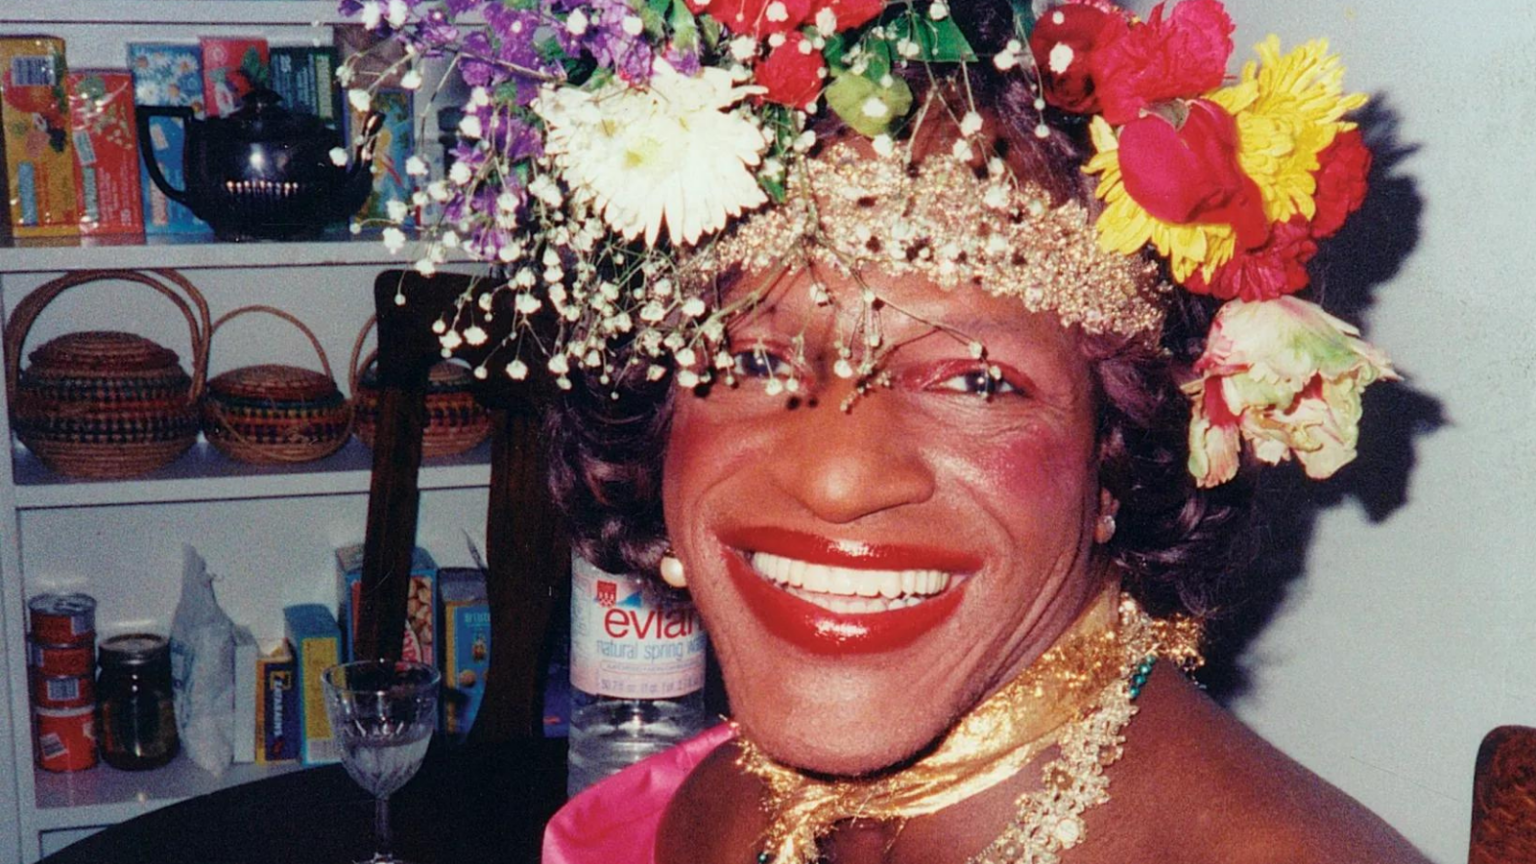 A photo of Marsha P. Johnson wearing a flower crown